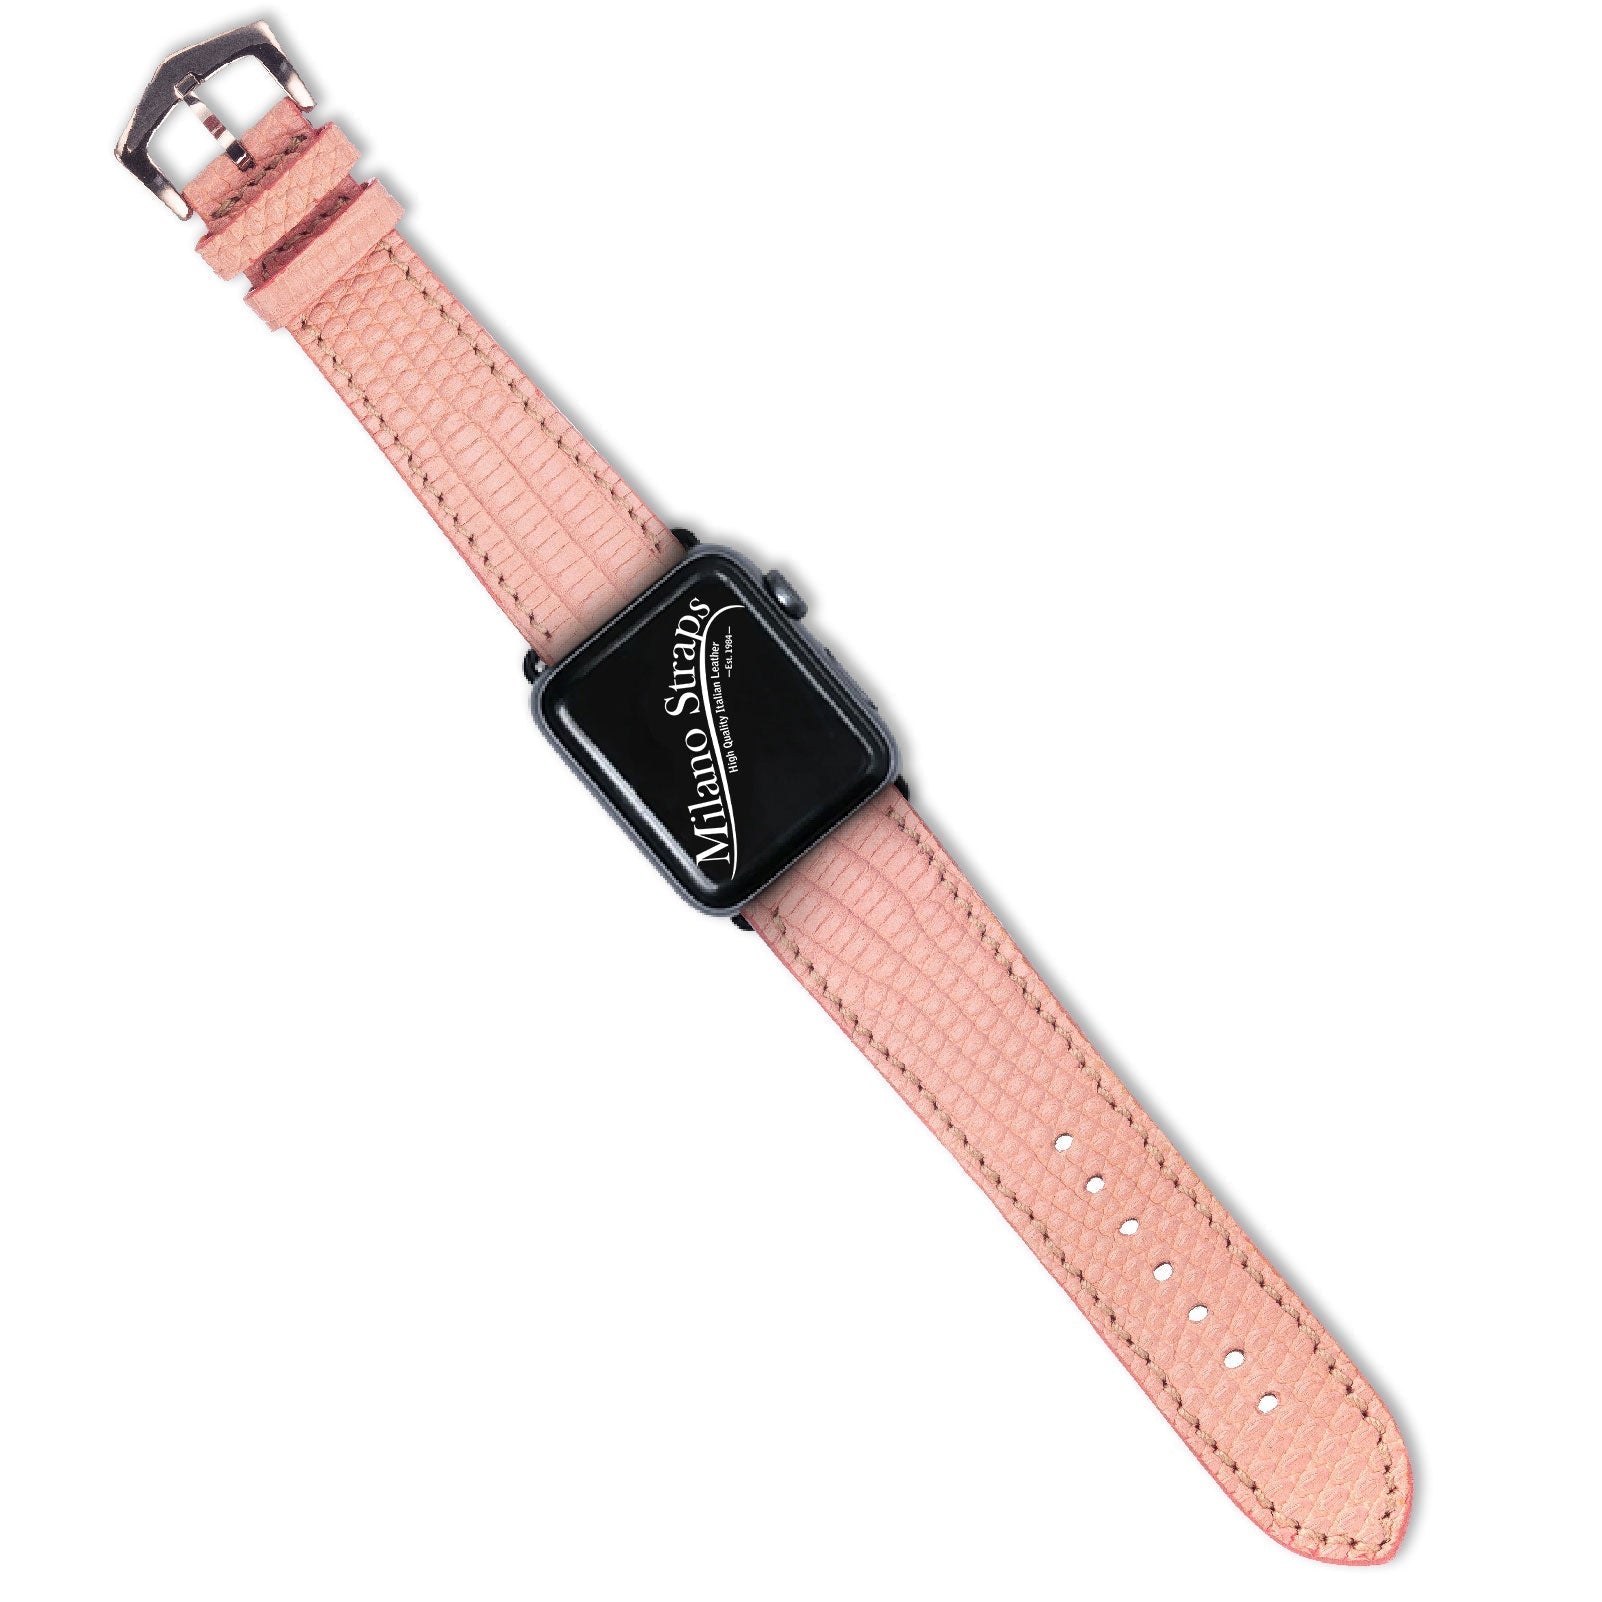 LUXURY LOUIS VUITTON LV LEATHER STRAP FOR APPLE WATCH BAND - Any-Cases